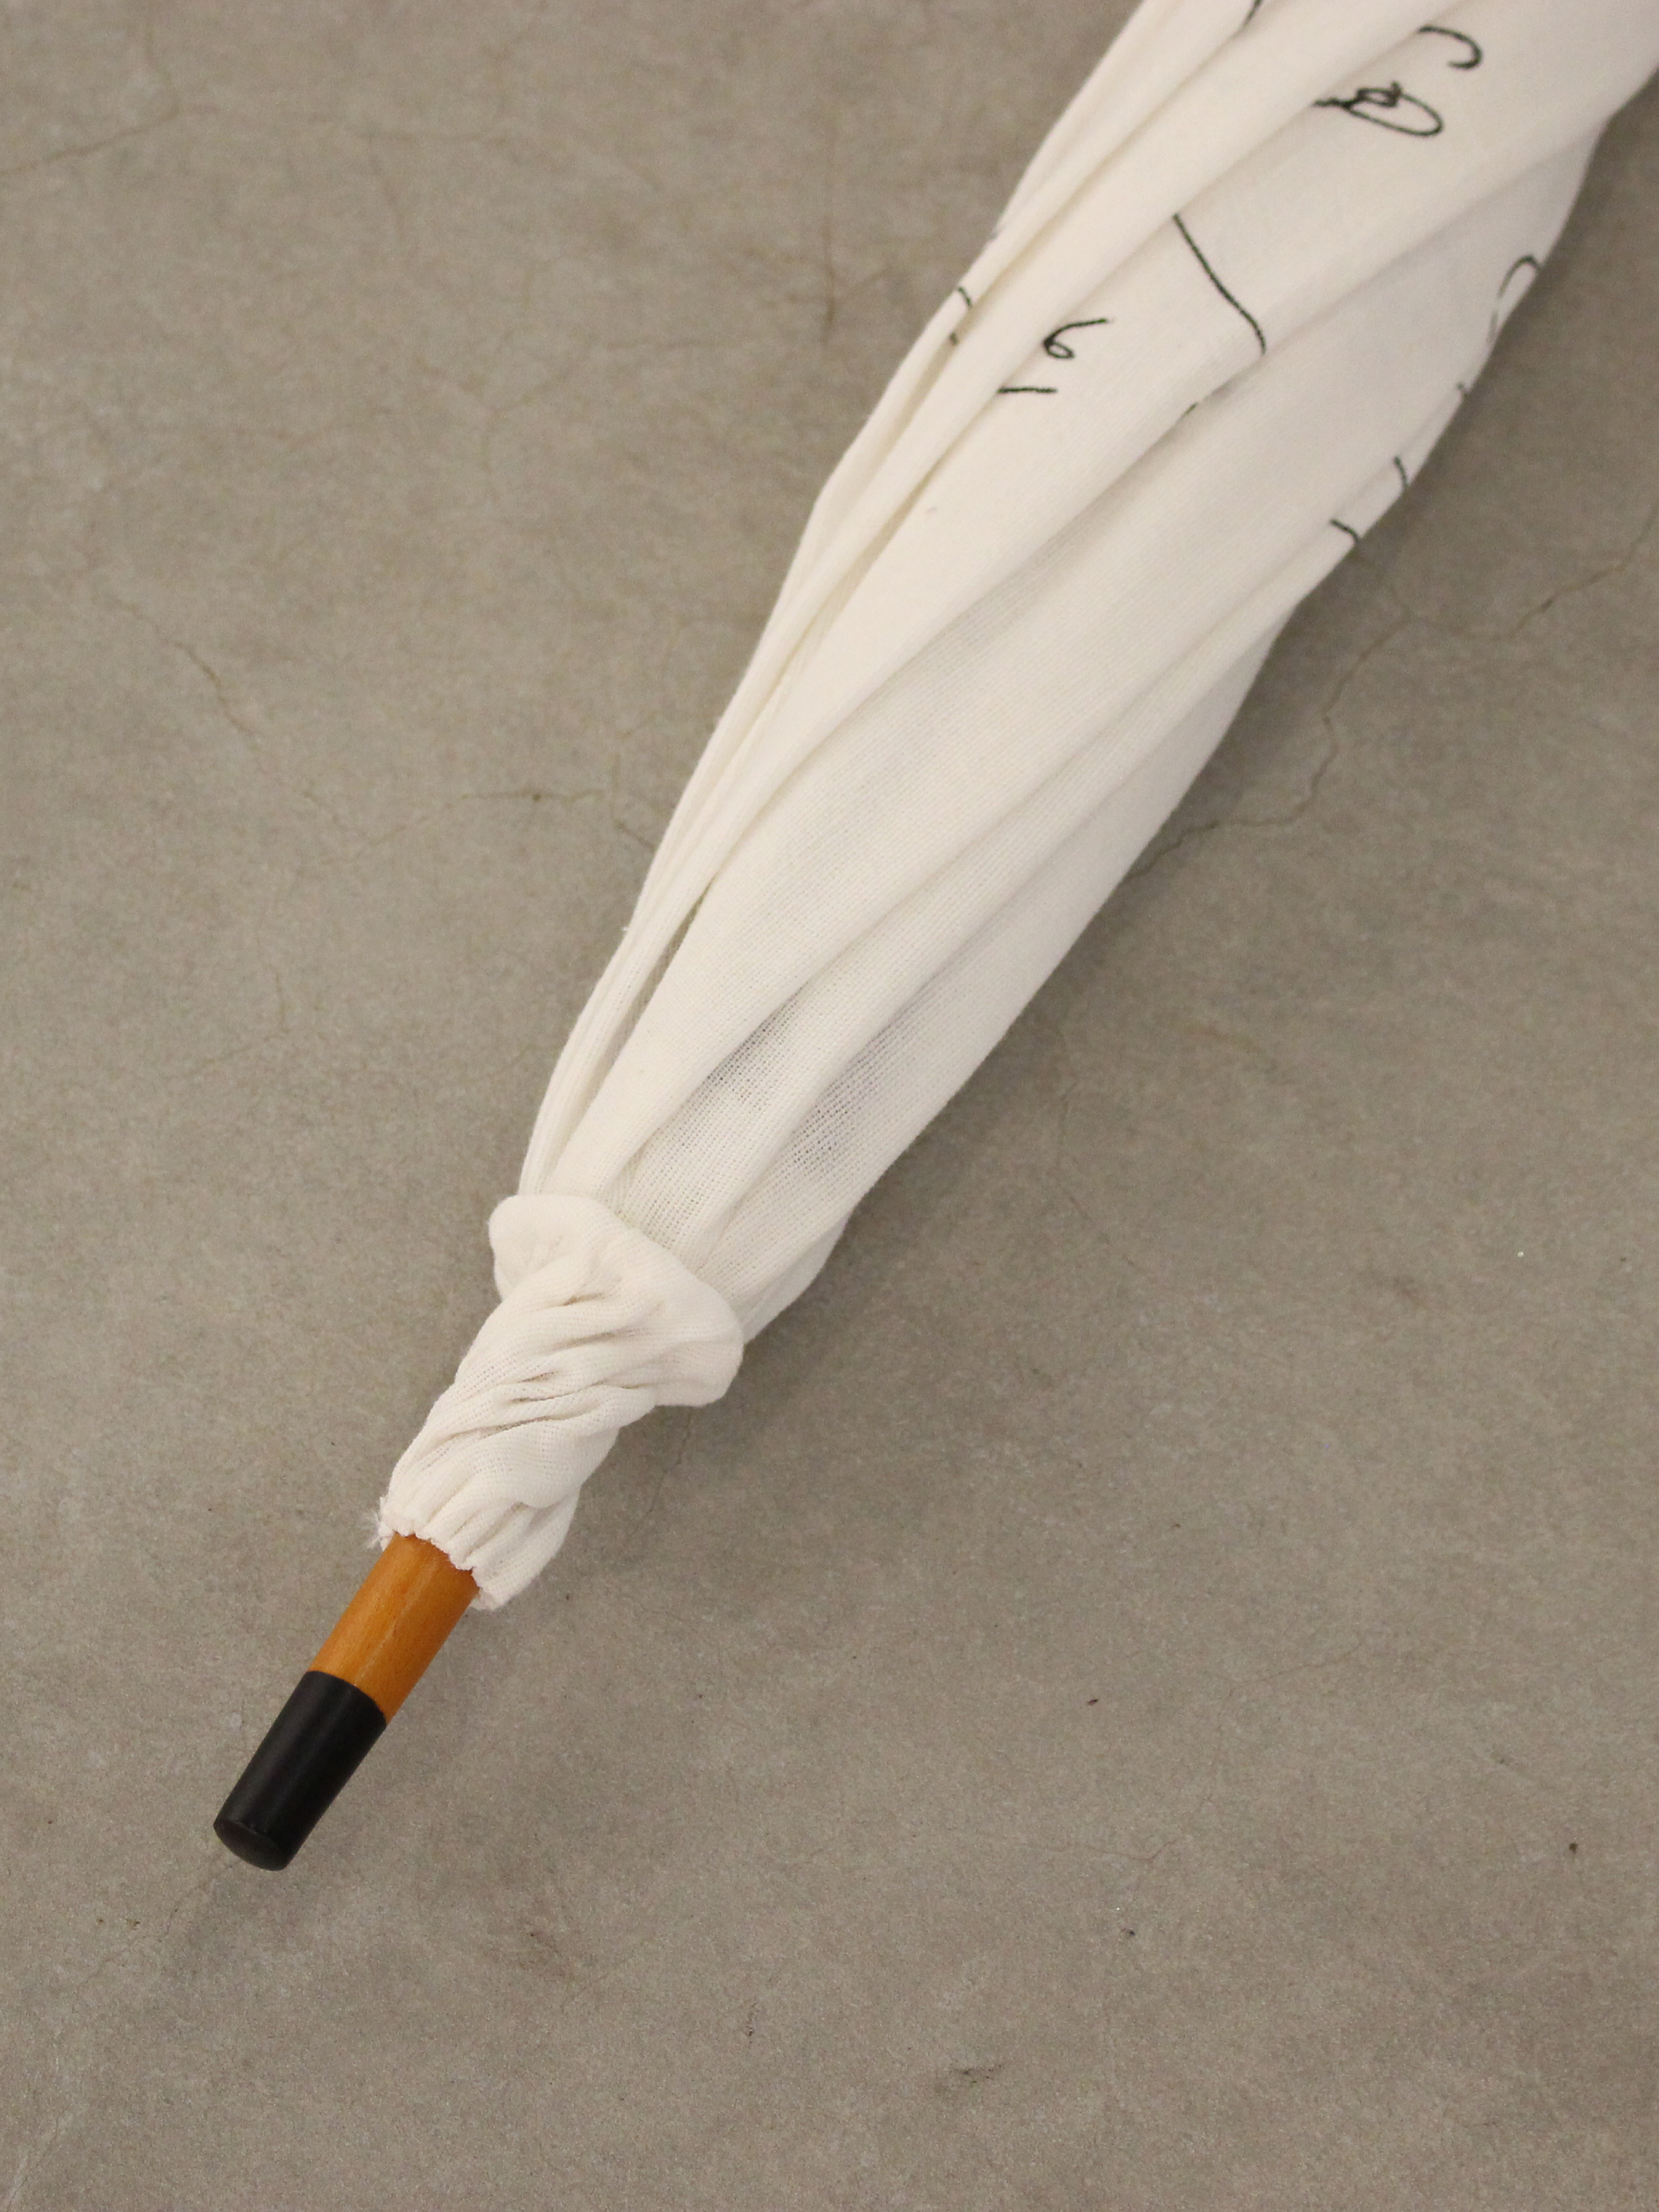 【SOLD OUT】DRAWING PARASOL b